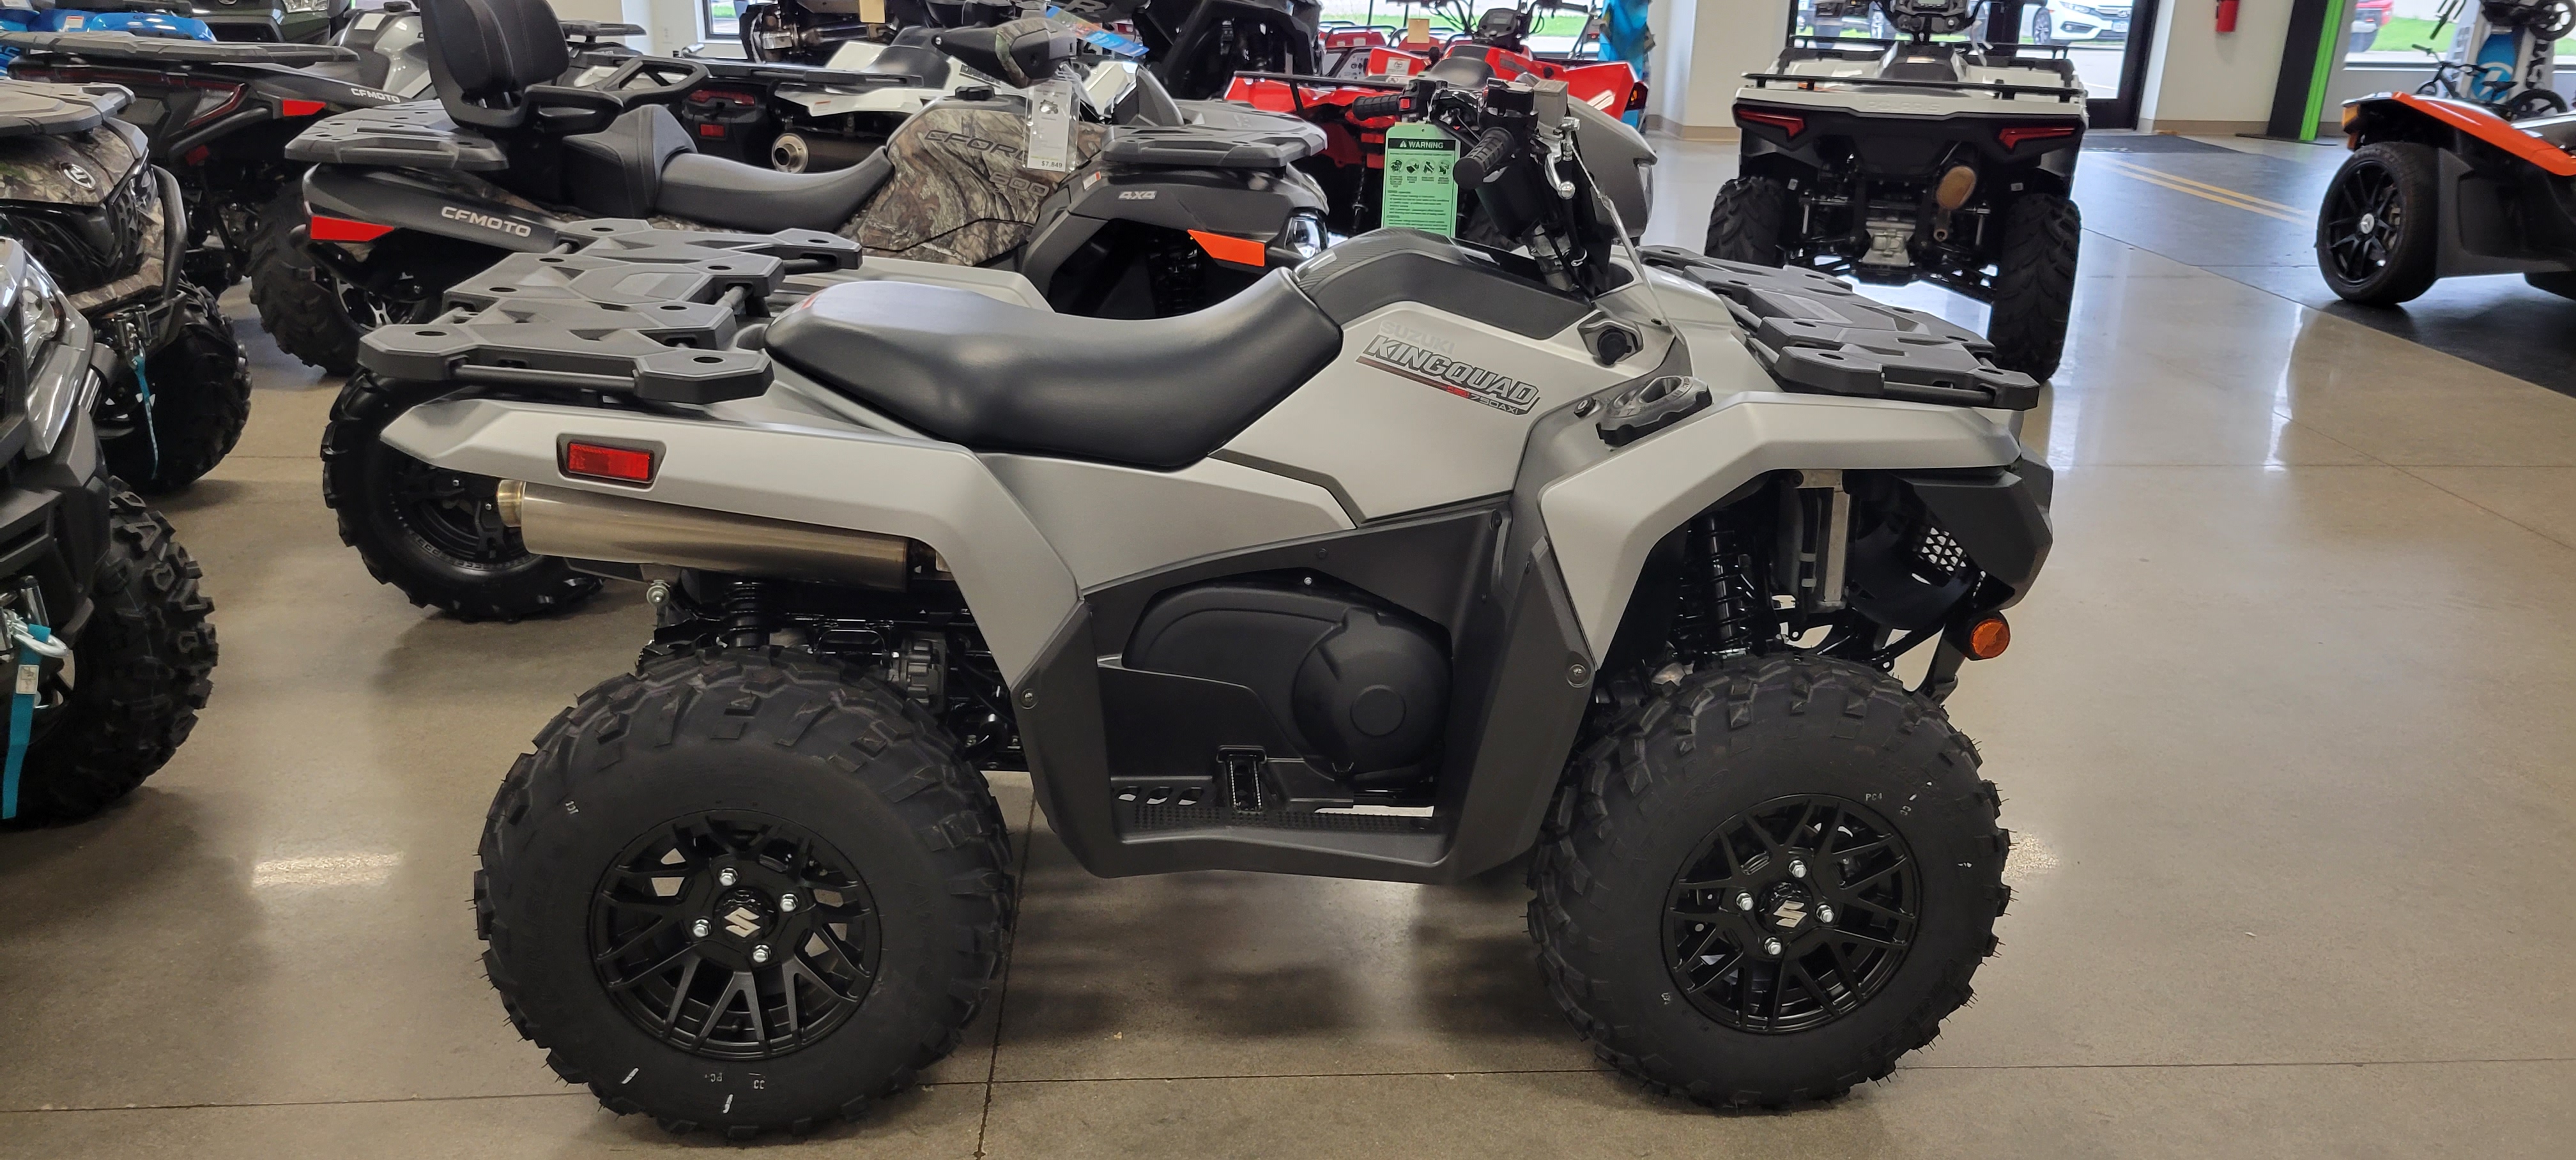 2022 Suzuki KingQuad 750 AXi Power Steering SE Camo at Brenny's Motorcycle Clinic, Bettendorf, IA 52722